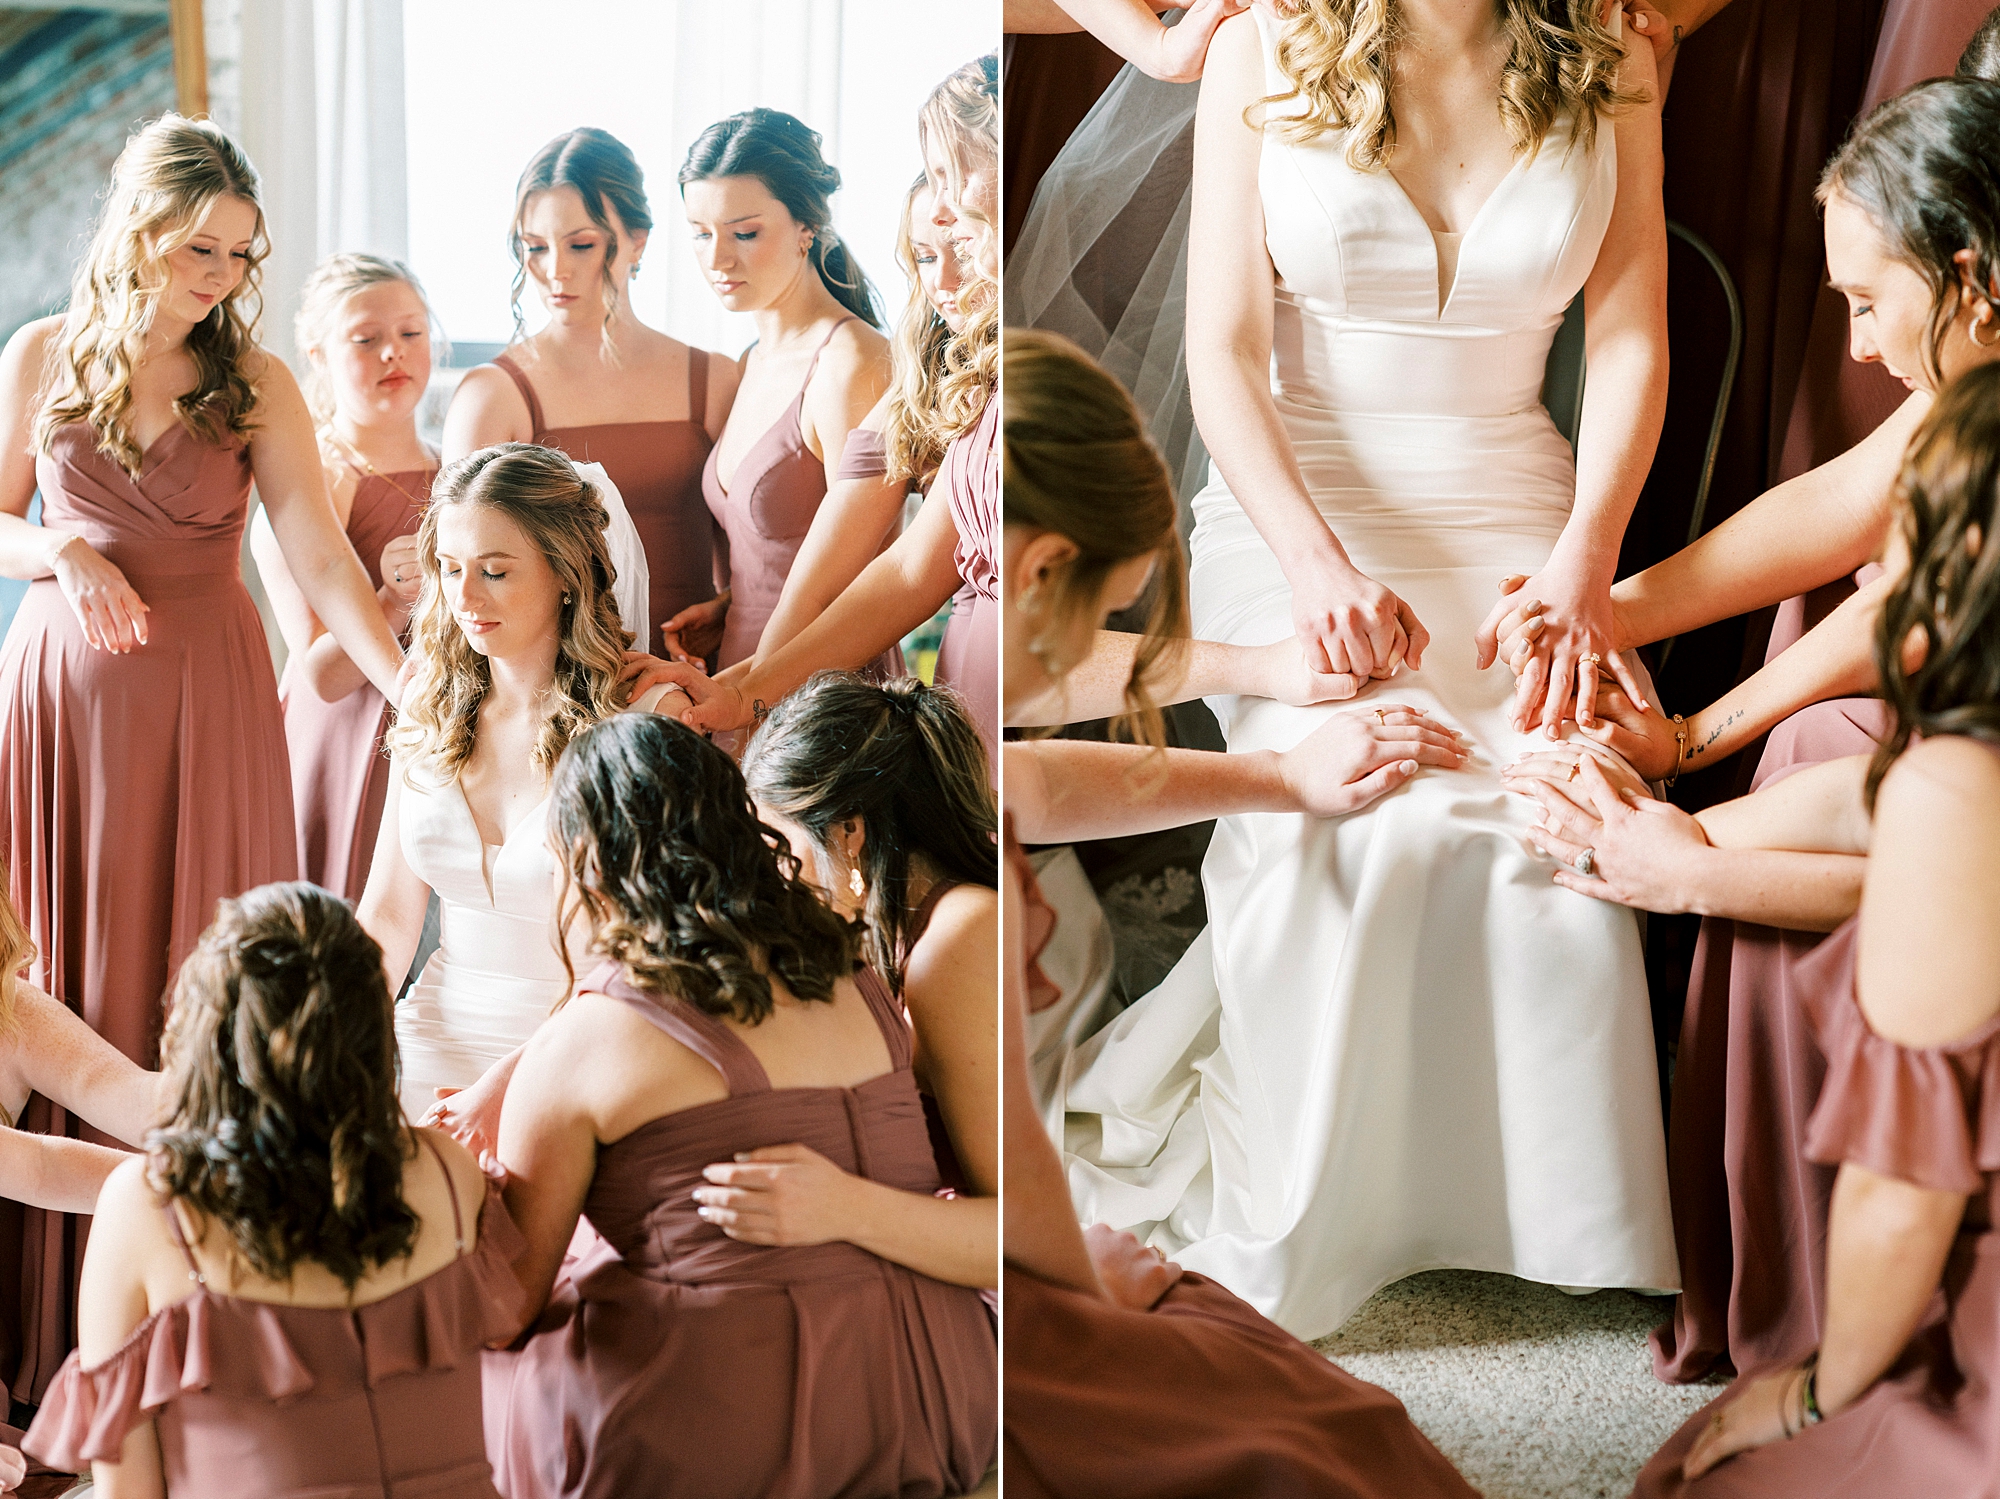 bridesmaids stand around bride praying with her before wedding ceremony at the Cadillac Service Garage